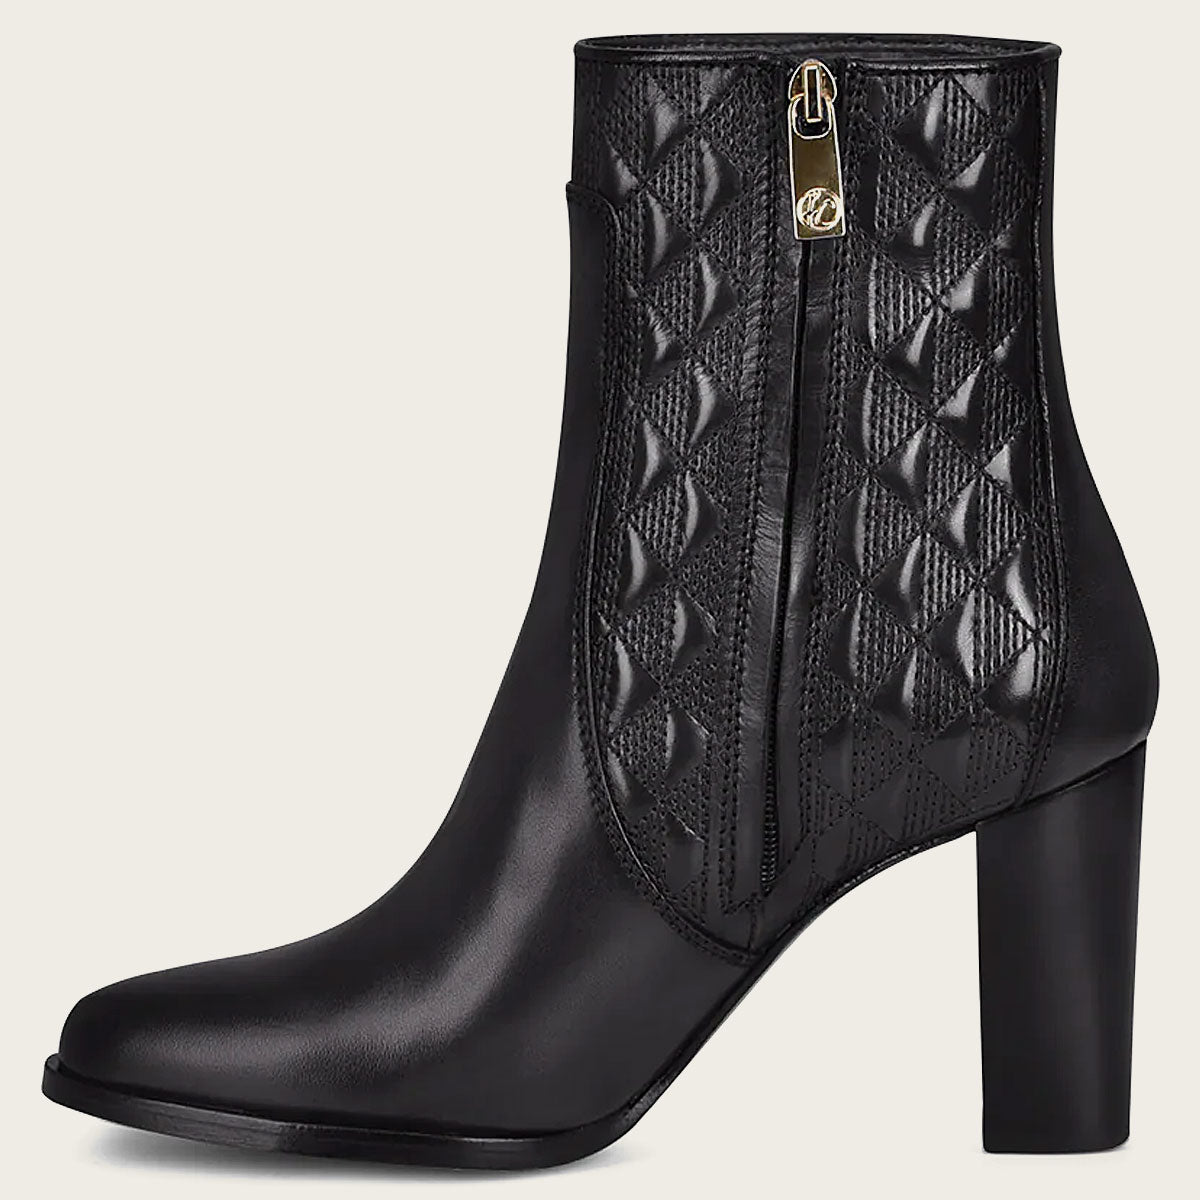 Stunning black leather bootie with intricate geometric details and sparkling Austrian crystals for a chic and glamorous look